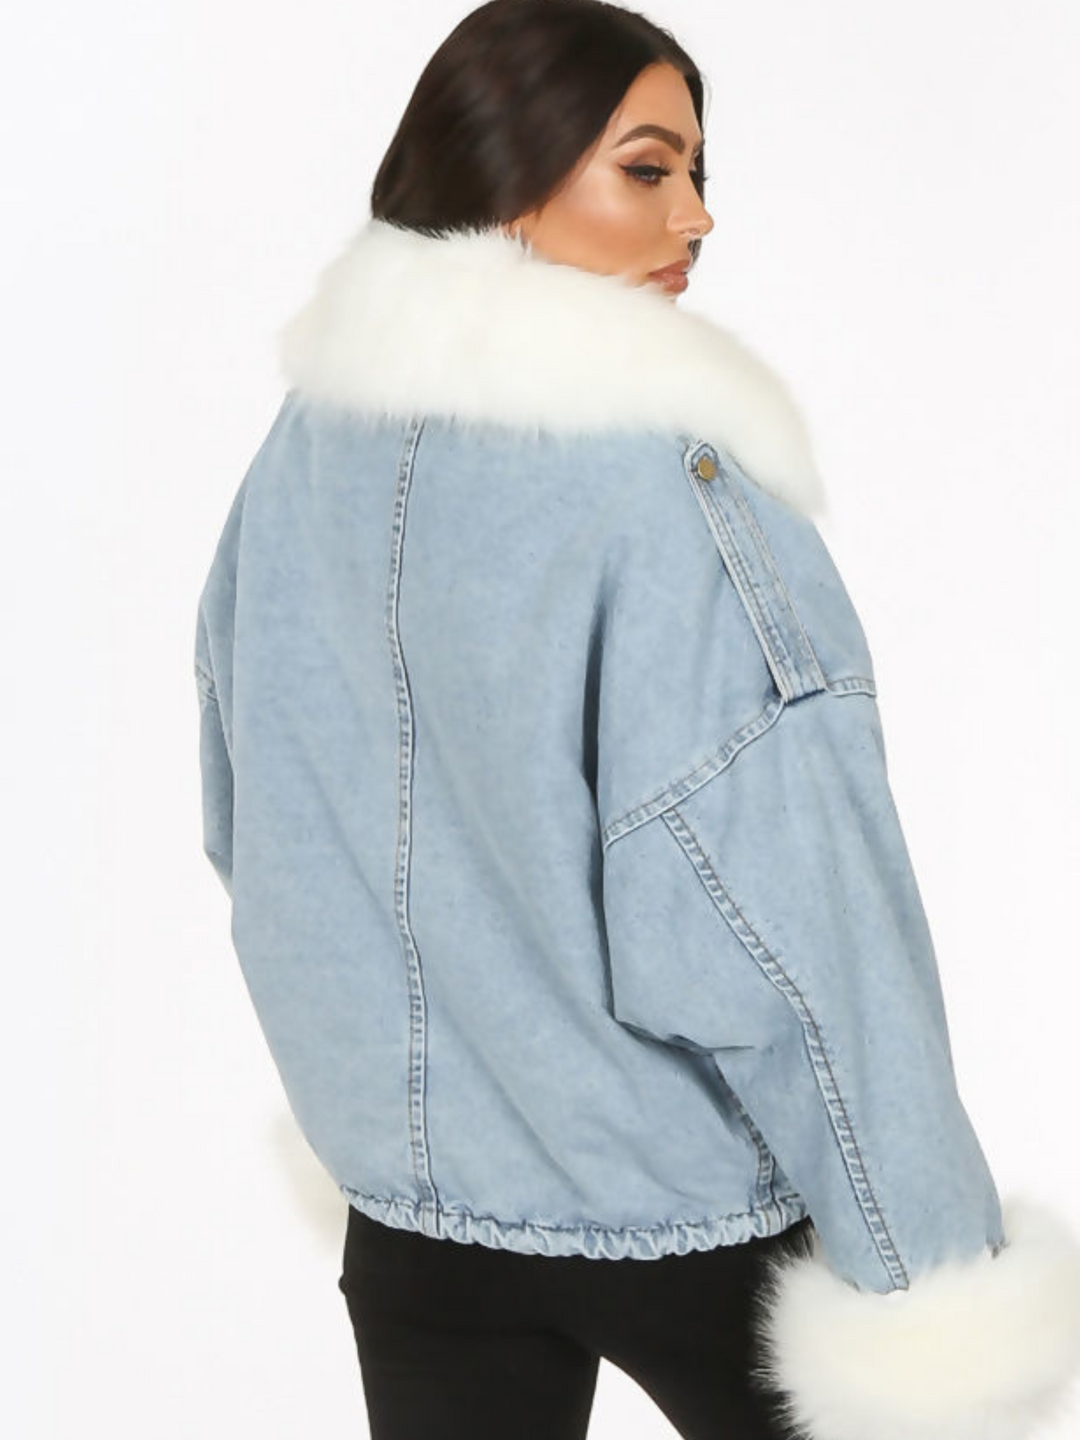 Model wears an oversized denim jacket with a white faux fur collar and white faux fur cuffs. Model stands with her back to the camera. The back of the jacket can be seen. 